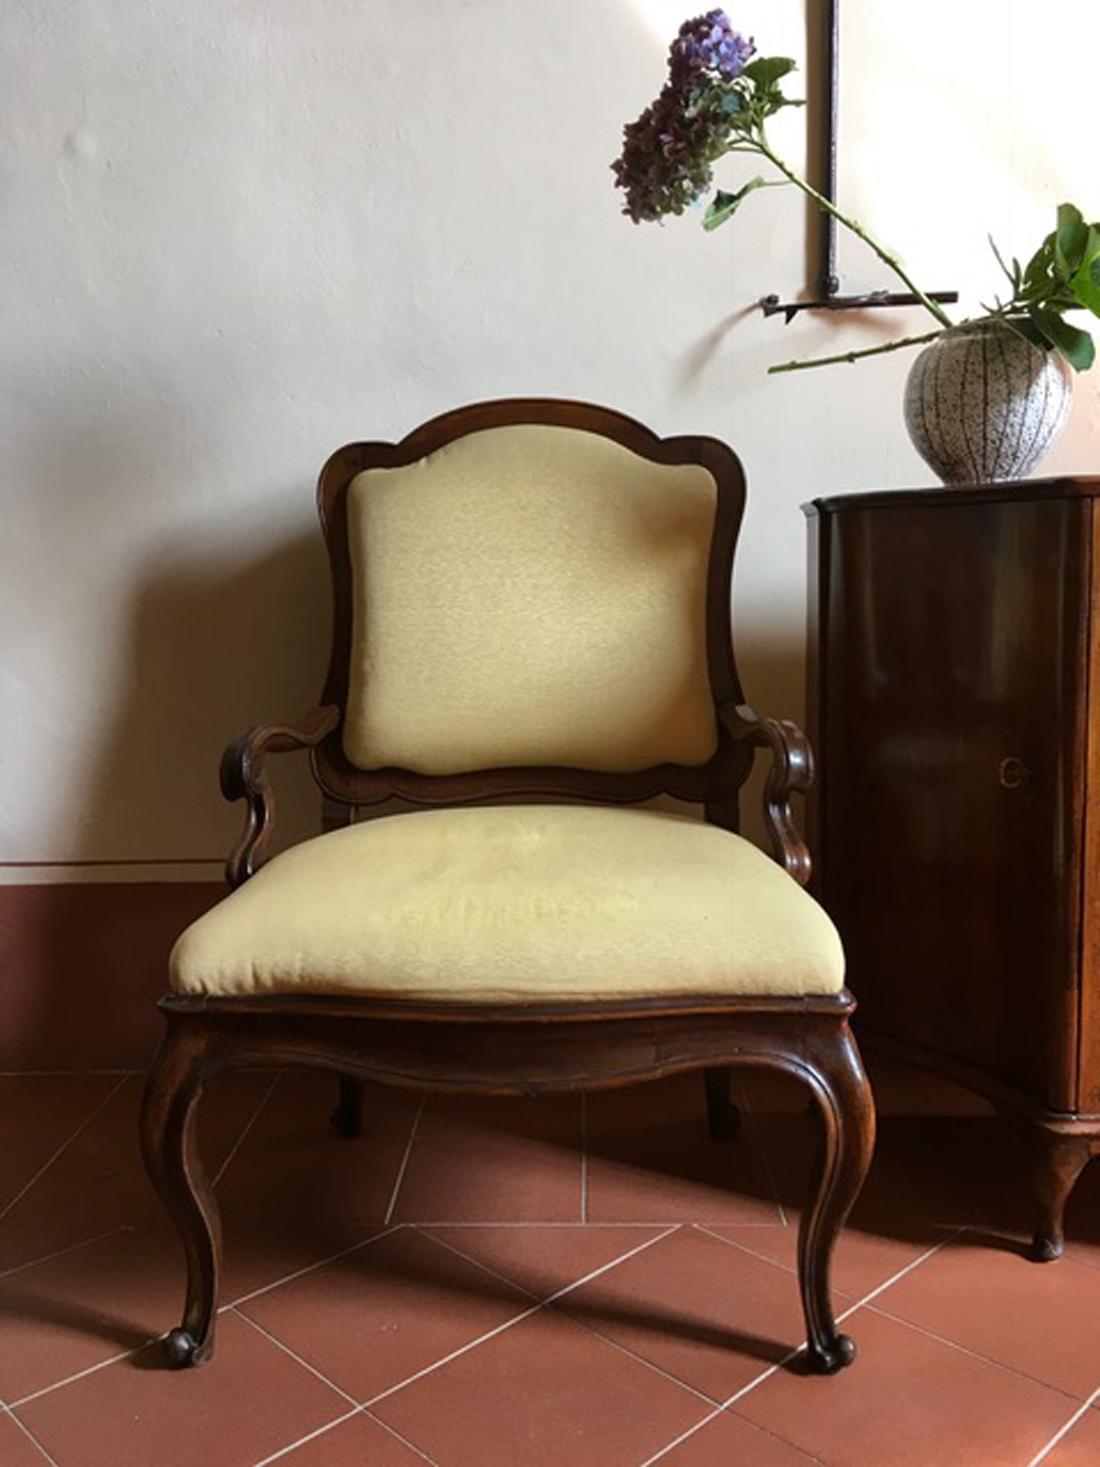 Pair of mid-18th century Genoese antique hand-carved walnut upholstered armchairs.
Handcrafted in Genoa, Liguria, Italy.
This pair of armchairs, will be delivered with a new upholstered cover with the fabric chosen by the client from those proposed,